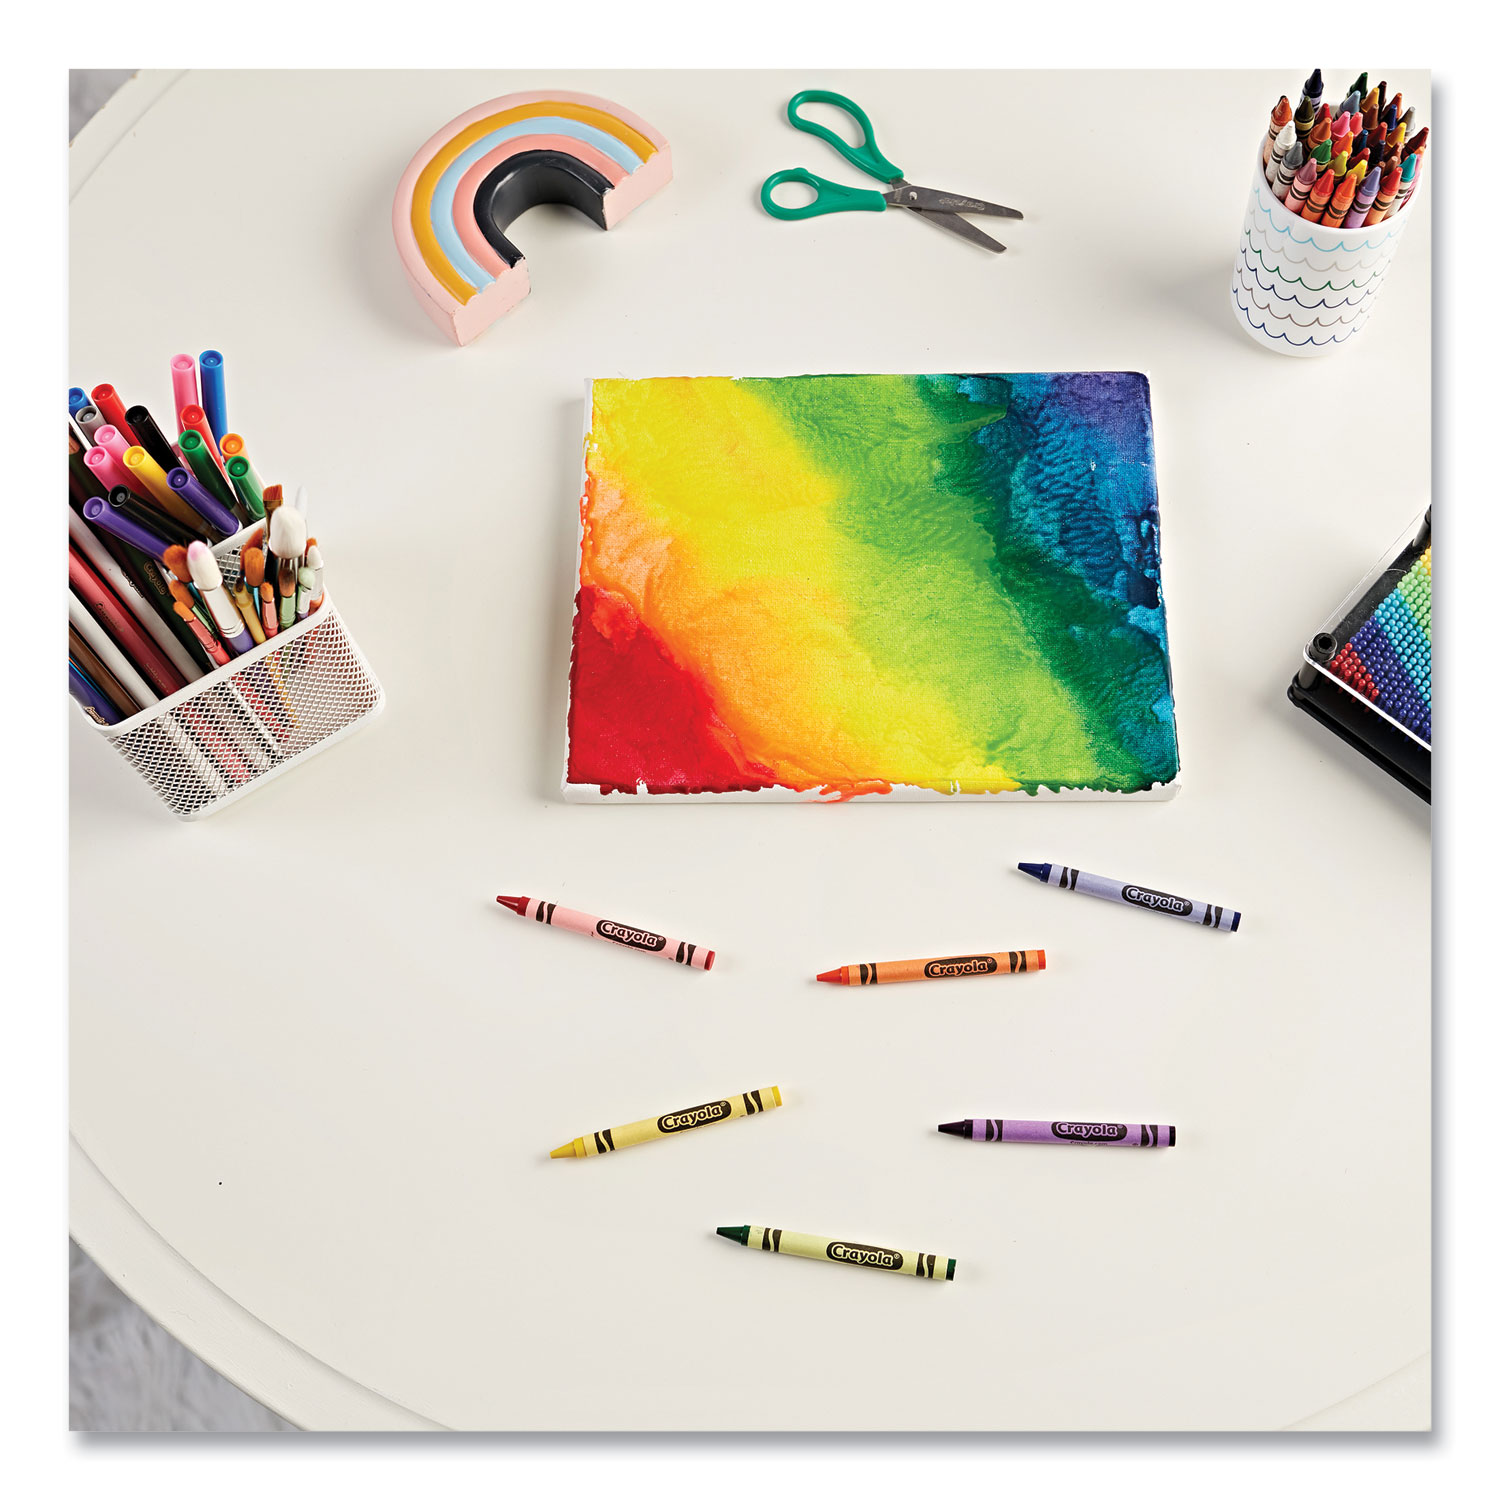 Crayola Watercolor Mixing Set With 8 Semi-moist Oval Pans and 1 Taklon  Brush for sale online